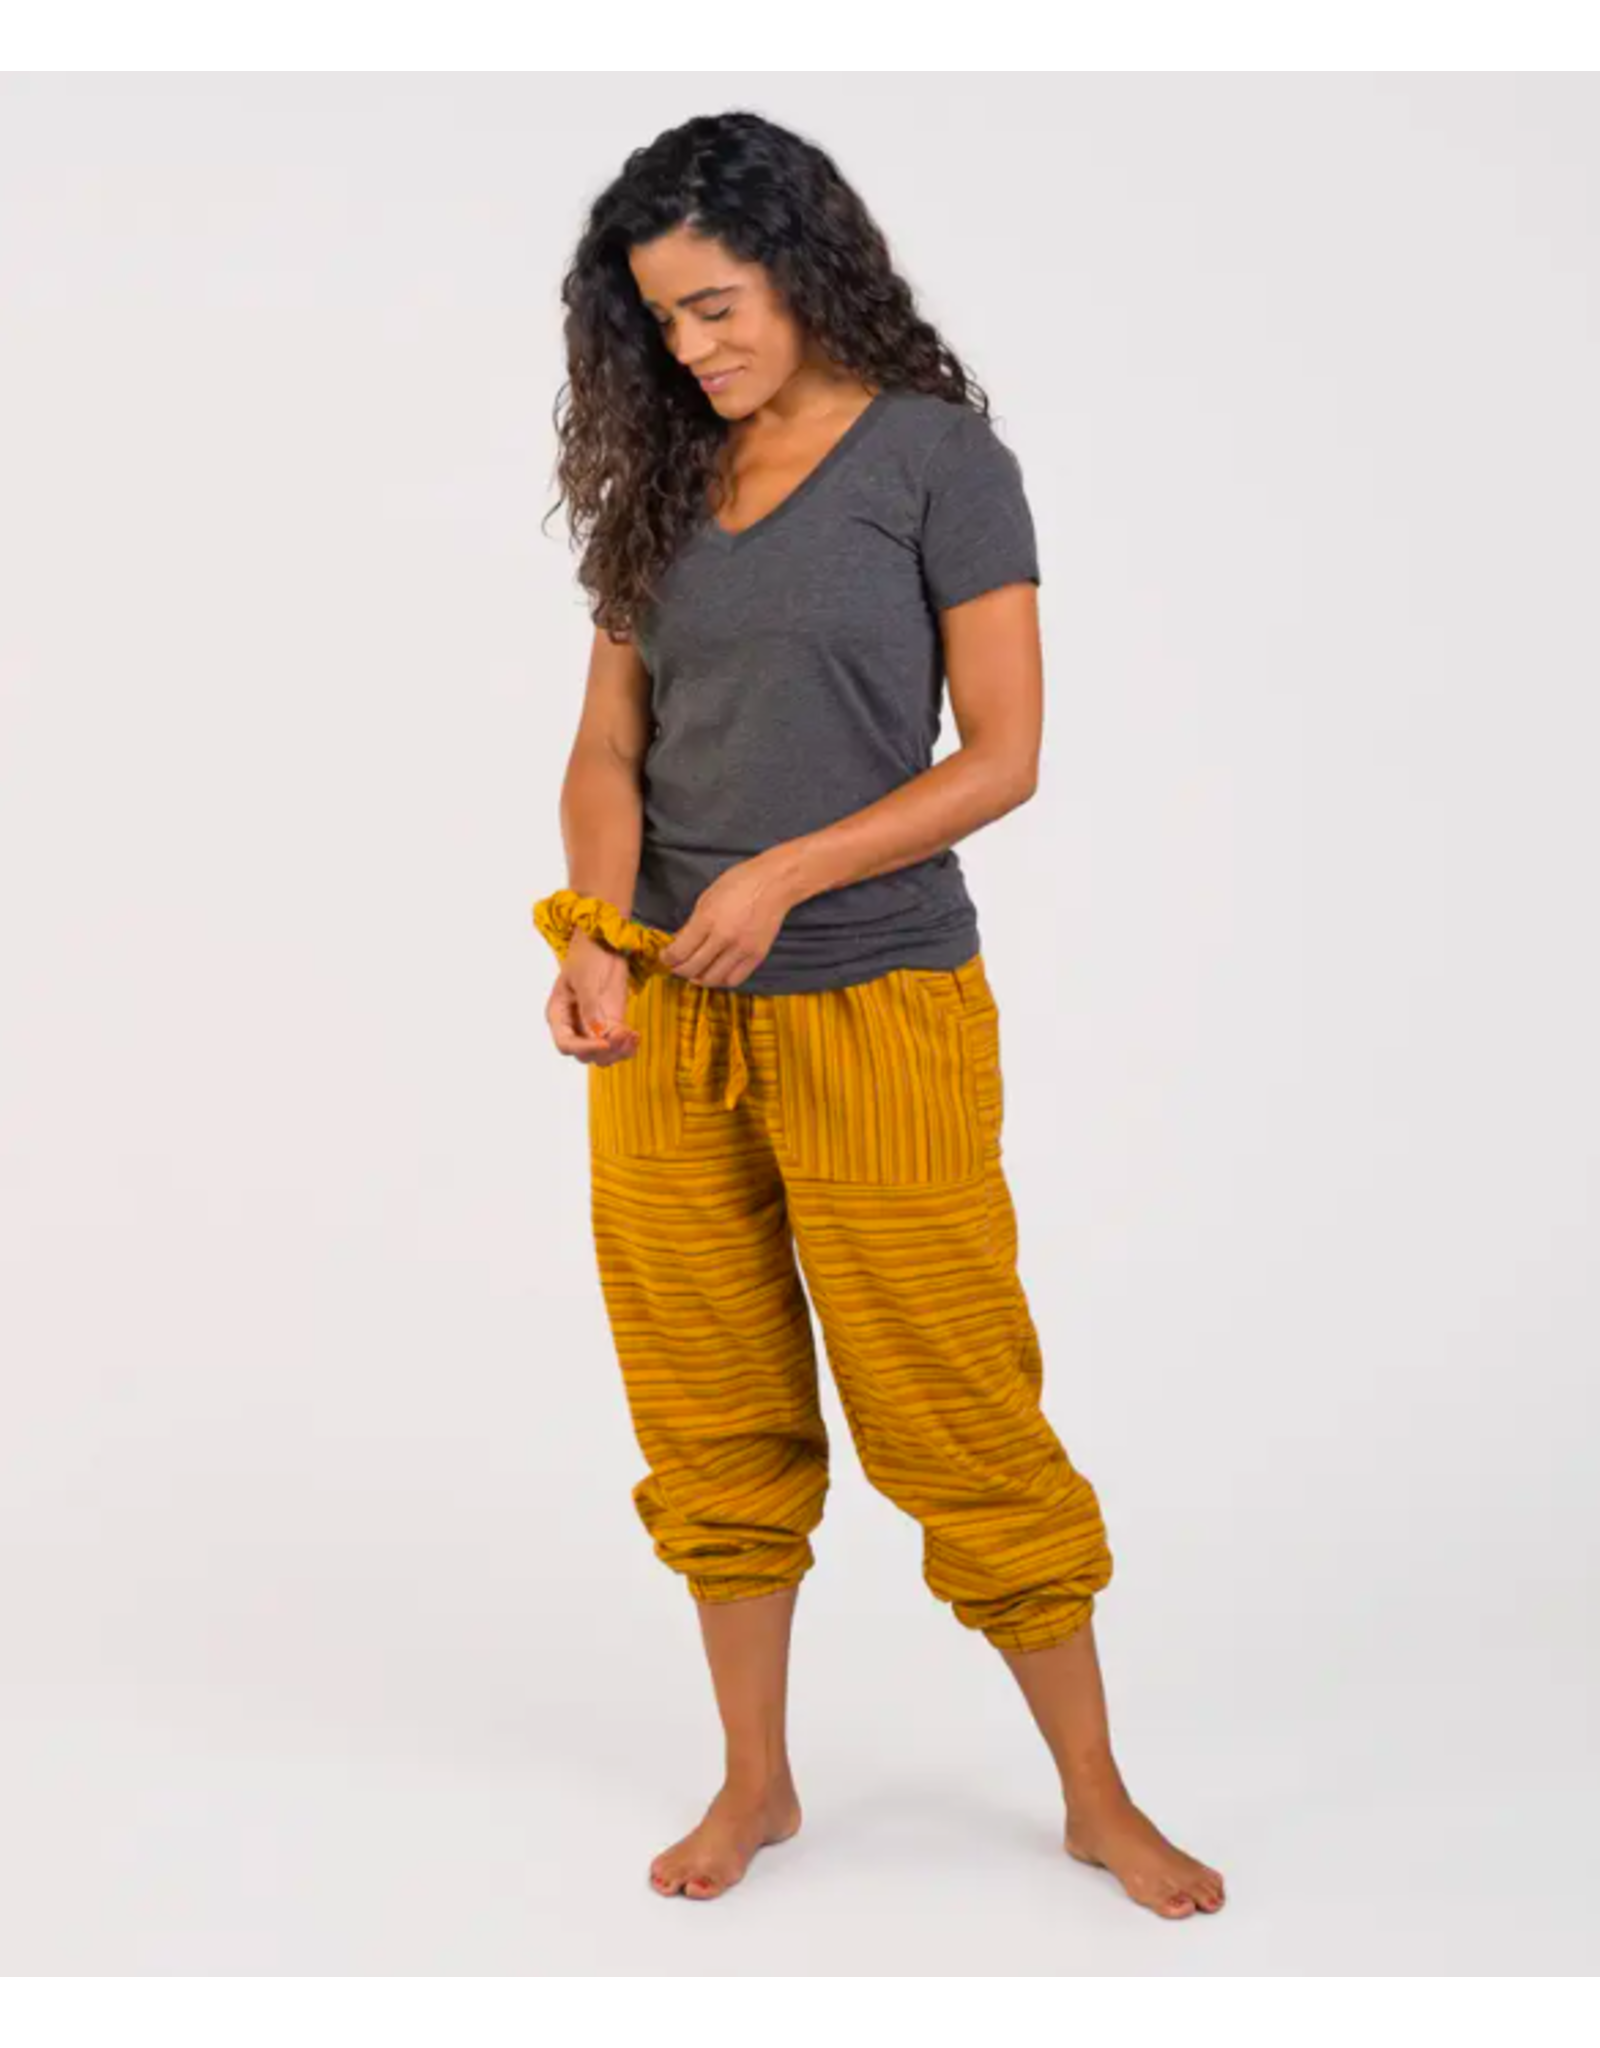 Trade roots Stripped Hippe Harem Pants, Pineapple